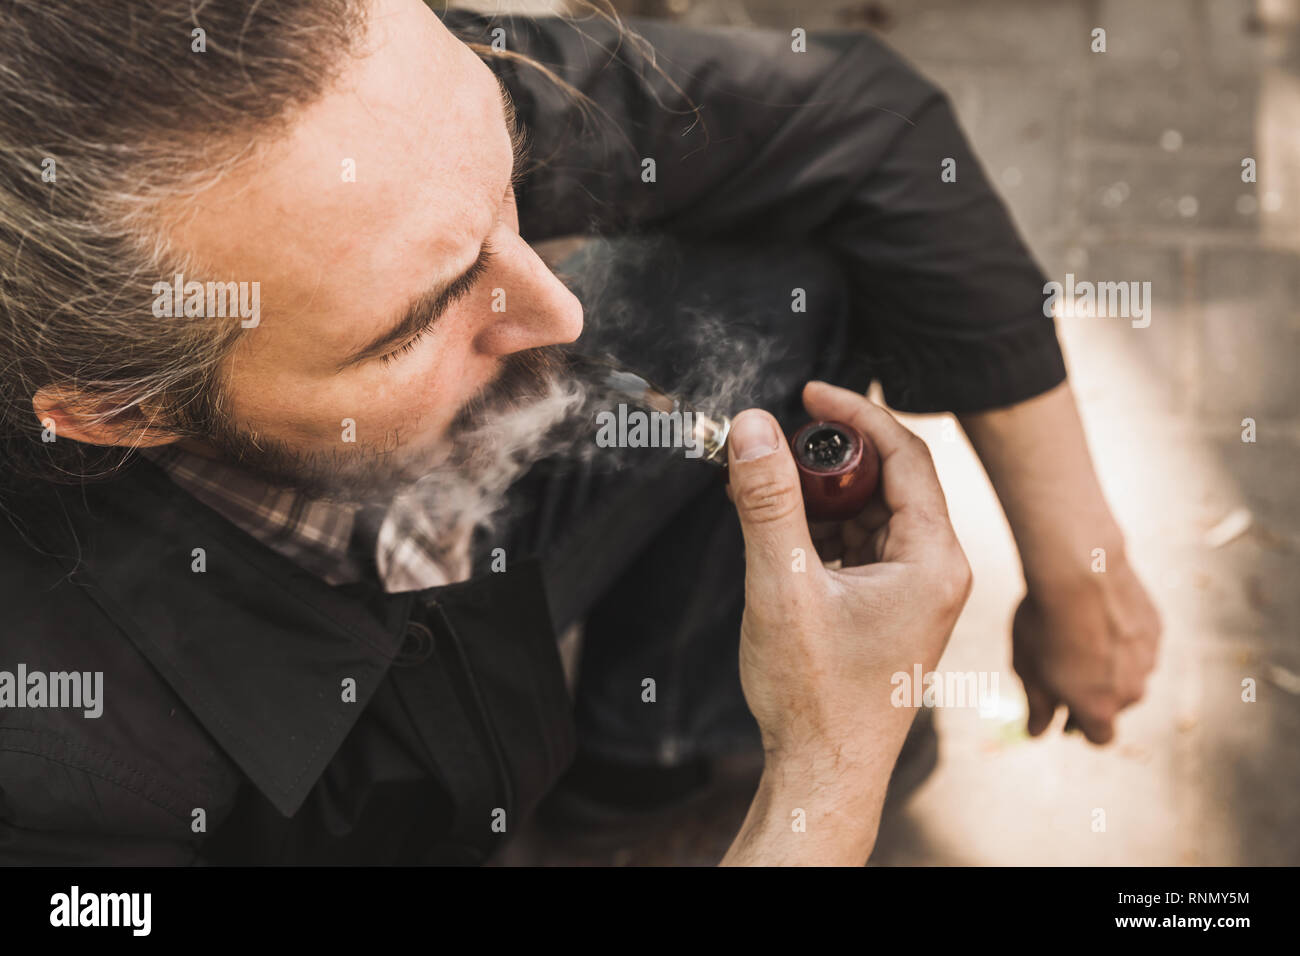 Bearded brutal man smoking pipe in park, close up portrait Stock Photo